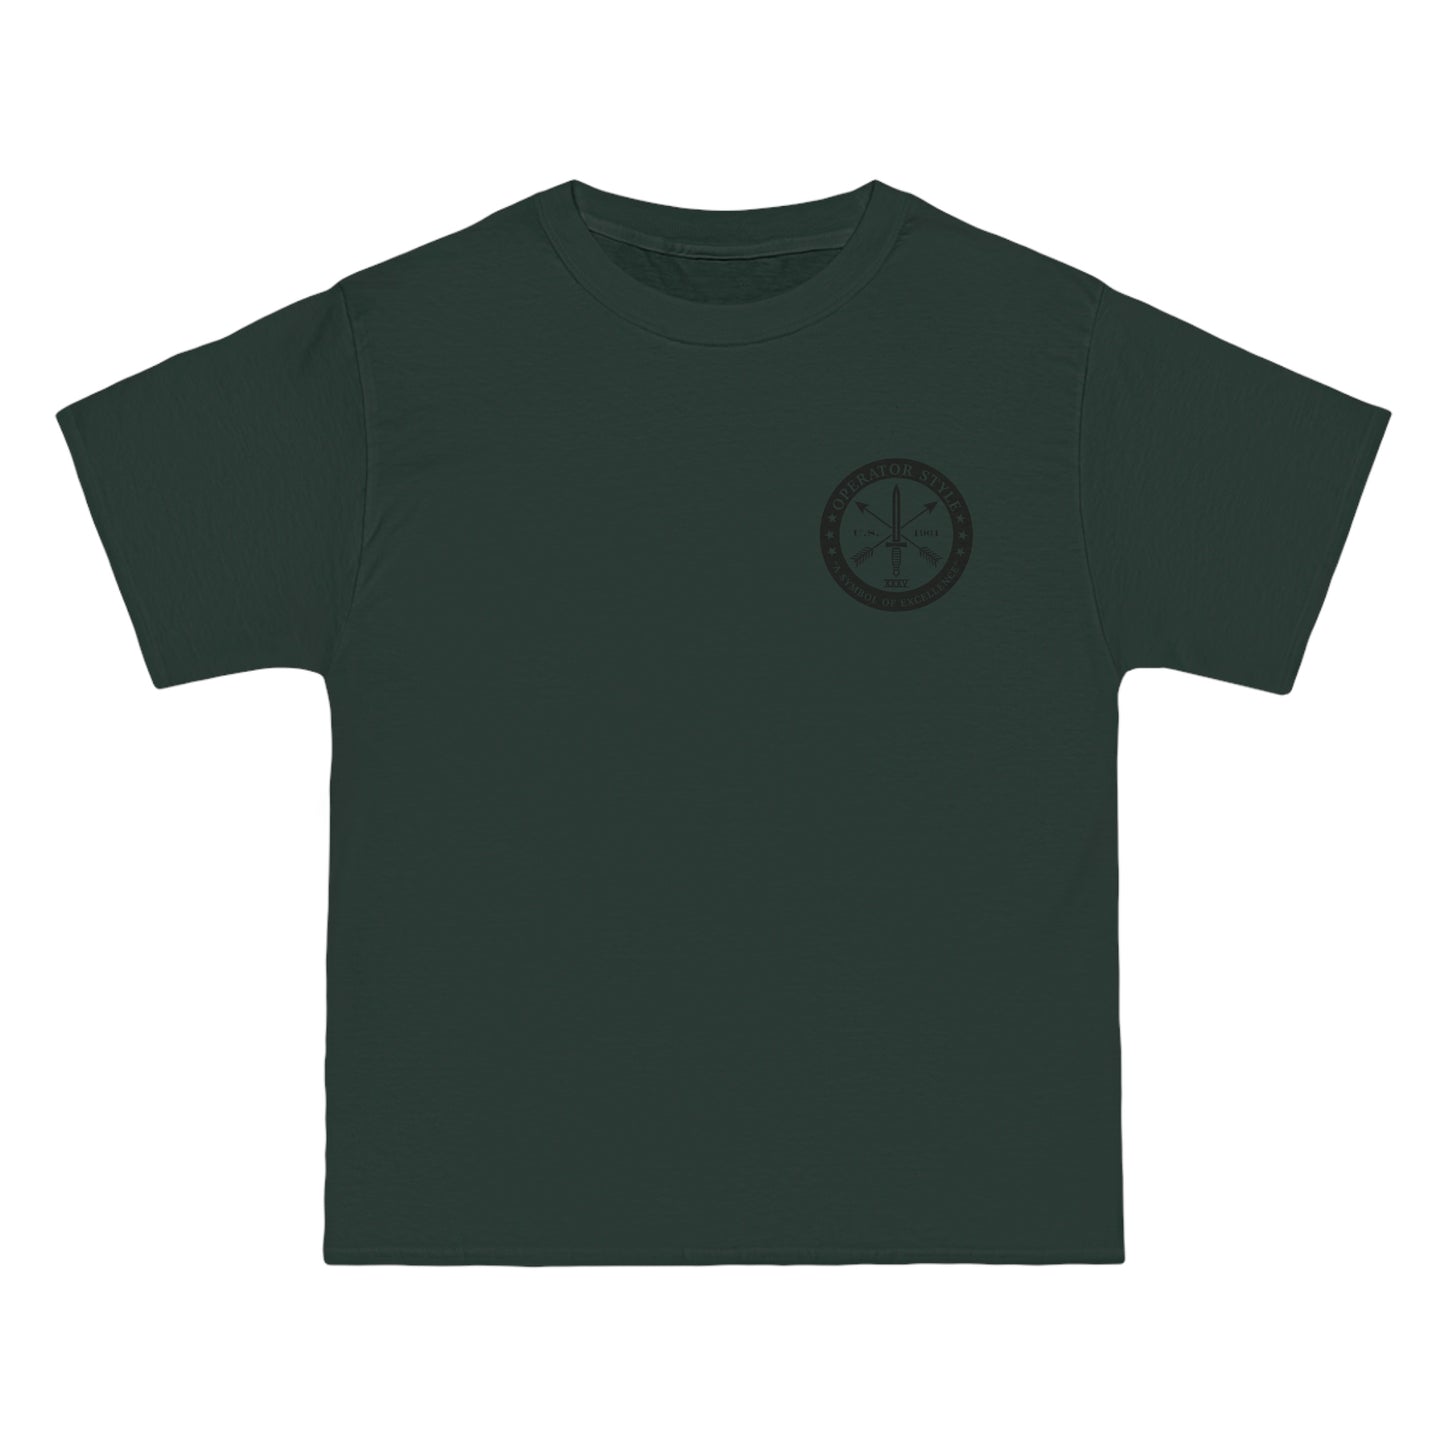 Operator Style/DCC Hanes 100% Cotton Beefy-T®  Short-Sleeve T-Shirt